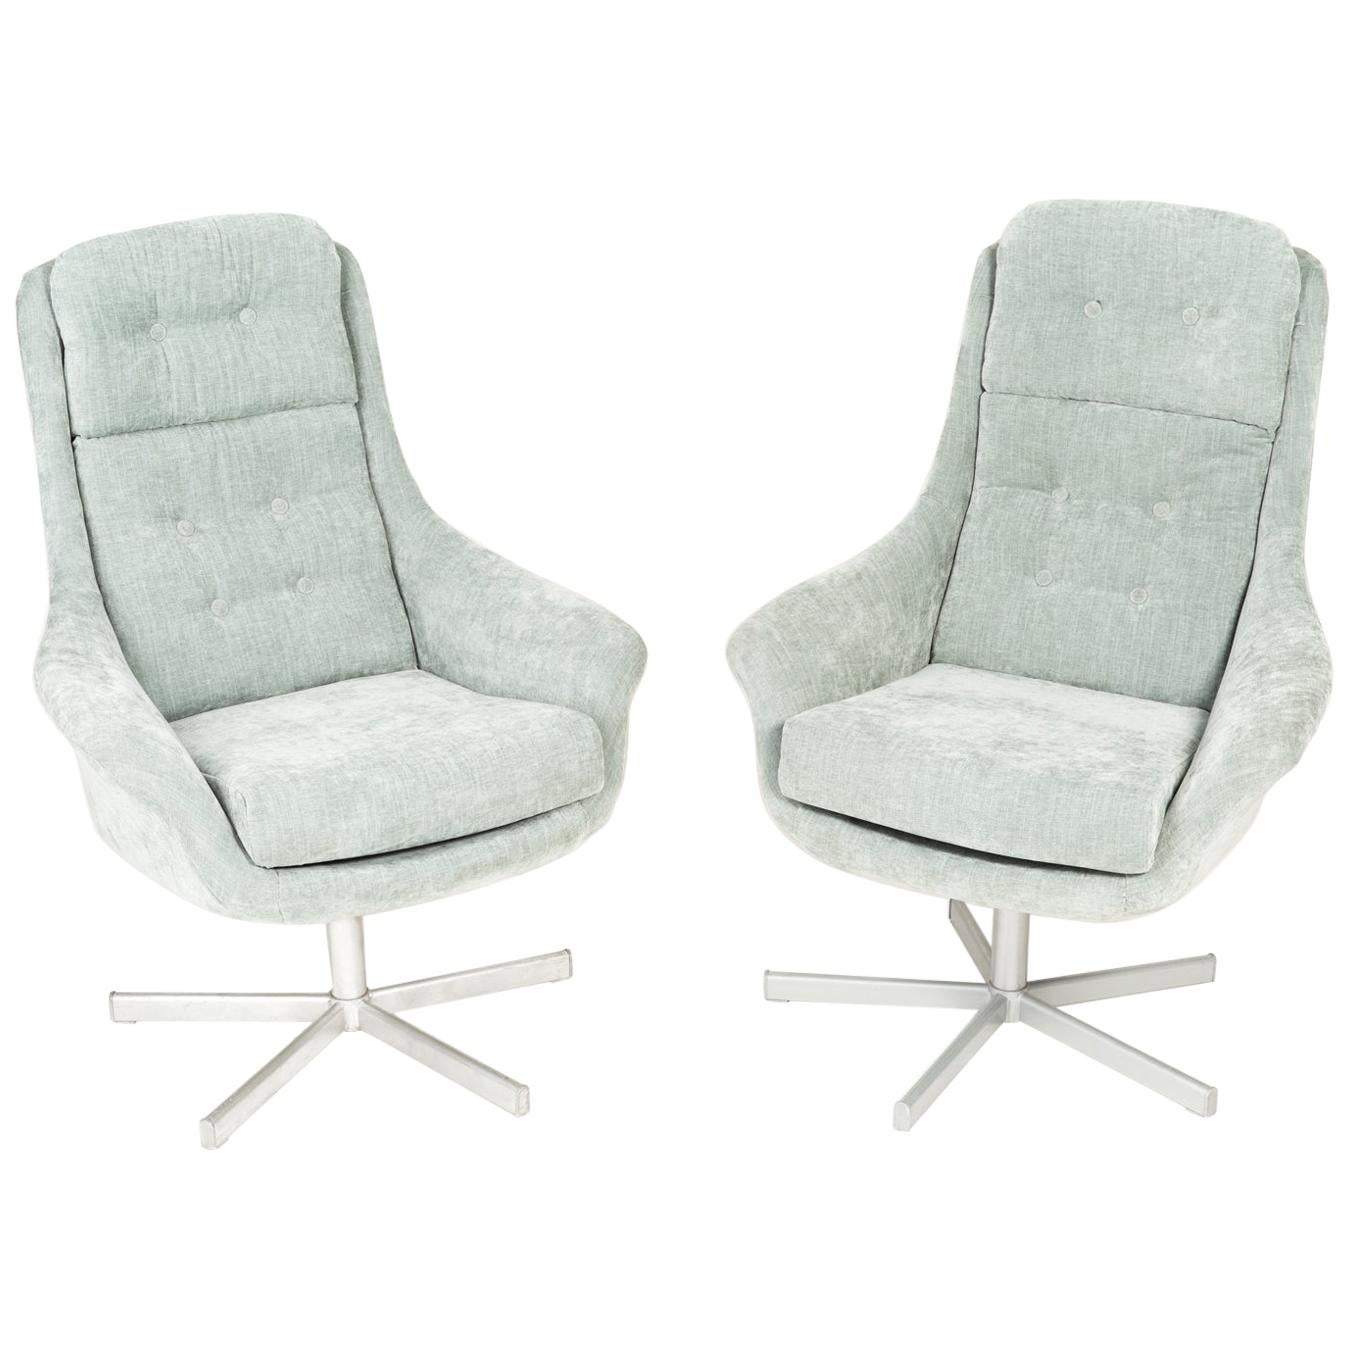 Set of Two 20th Century Vintage Light Green Swivel Armchairs, 1960s